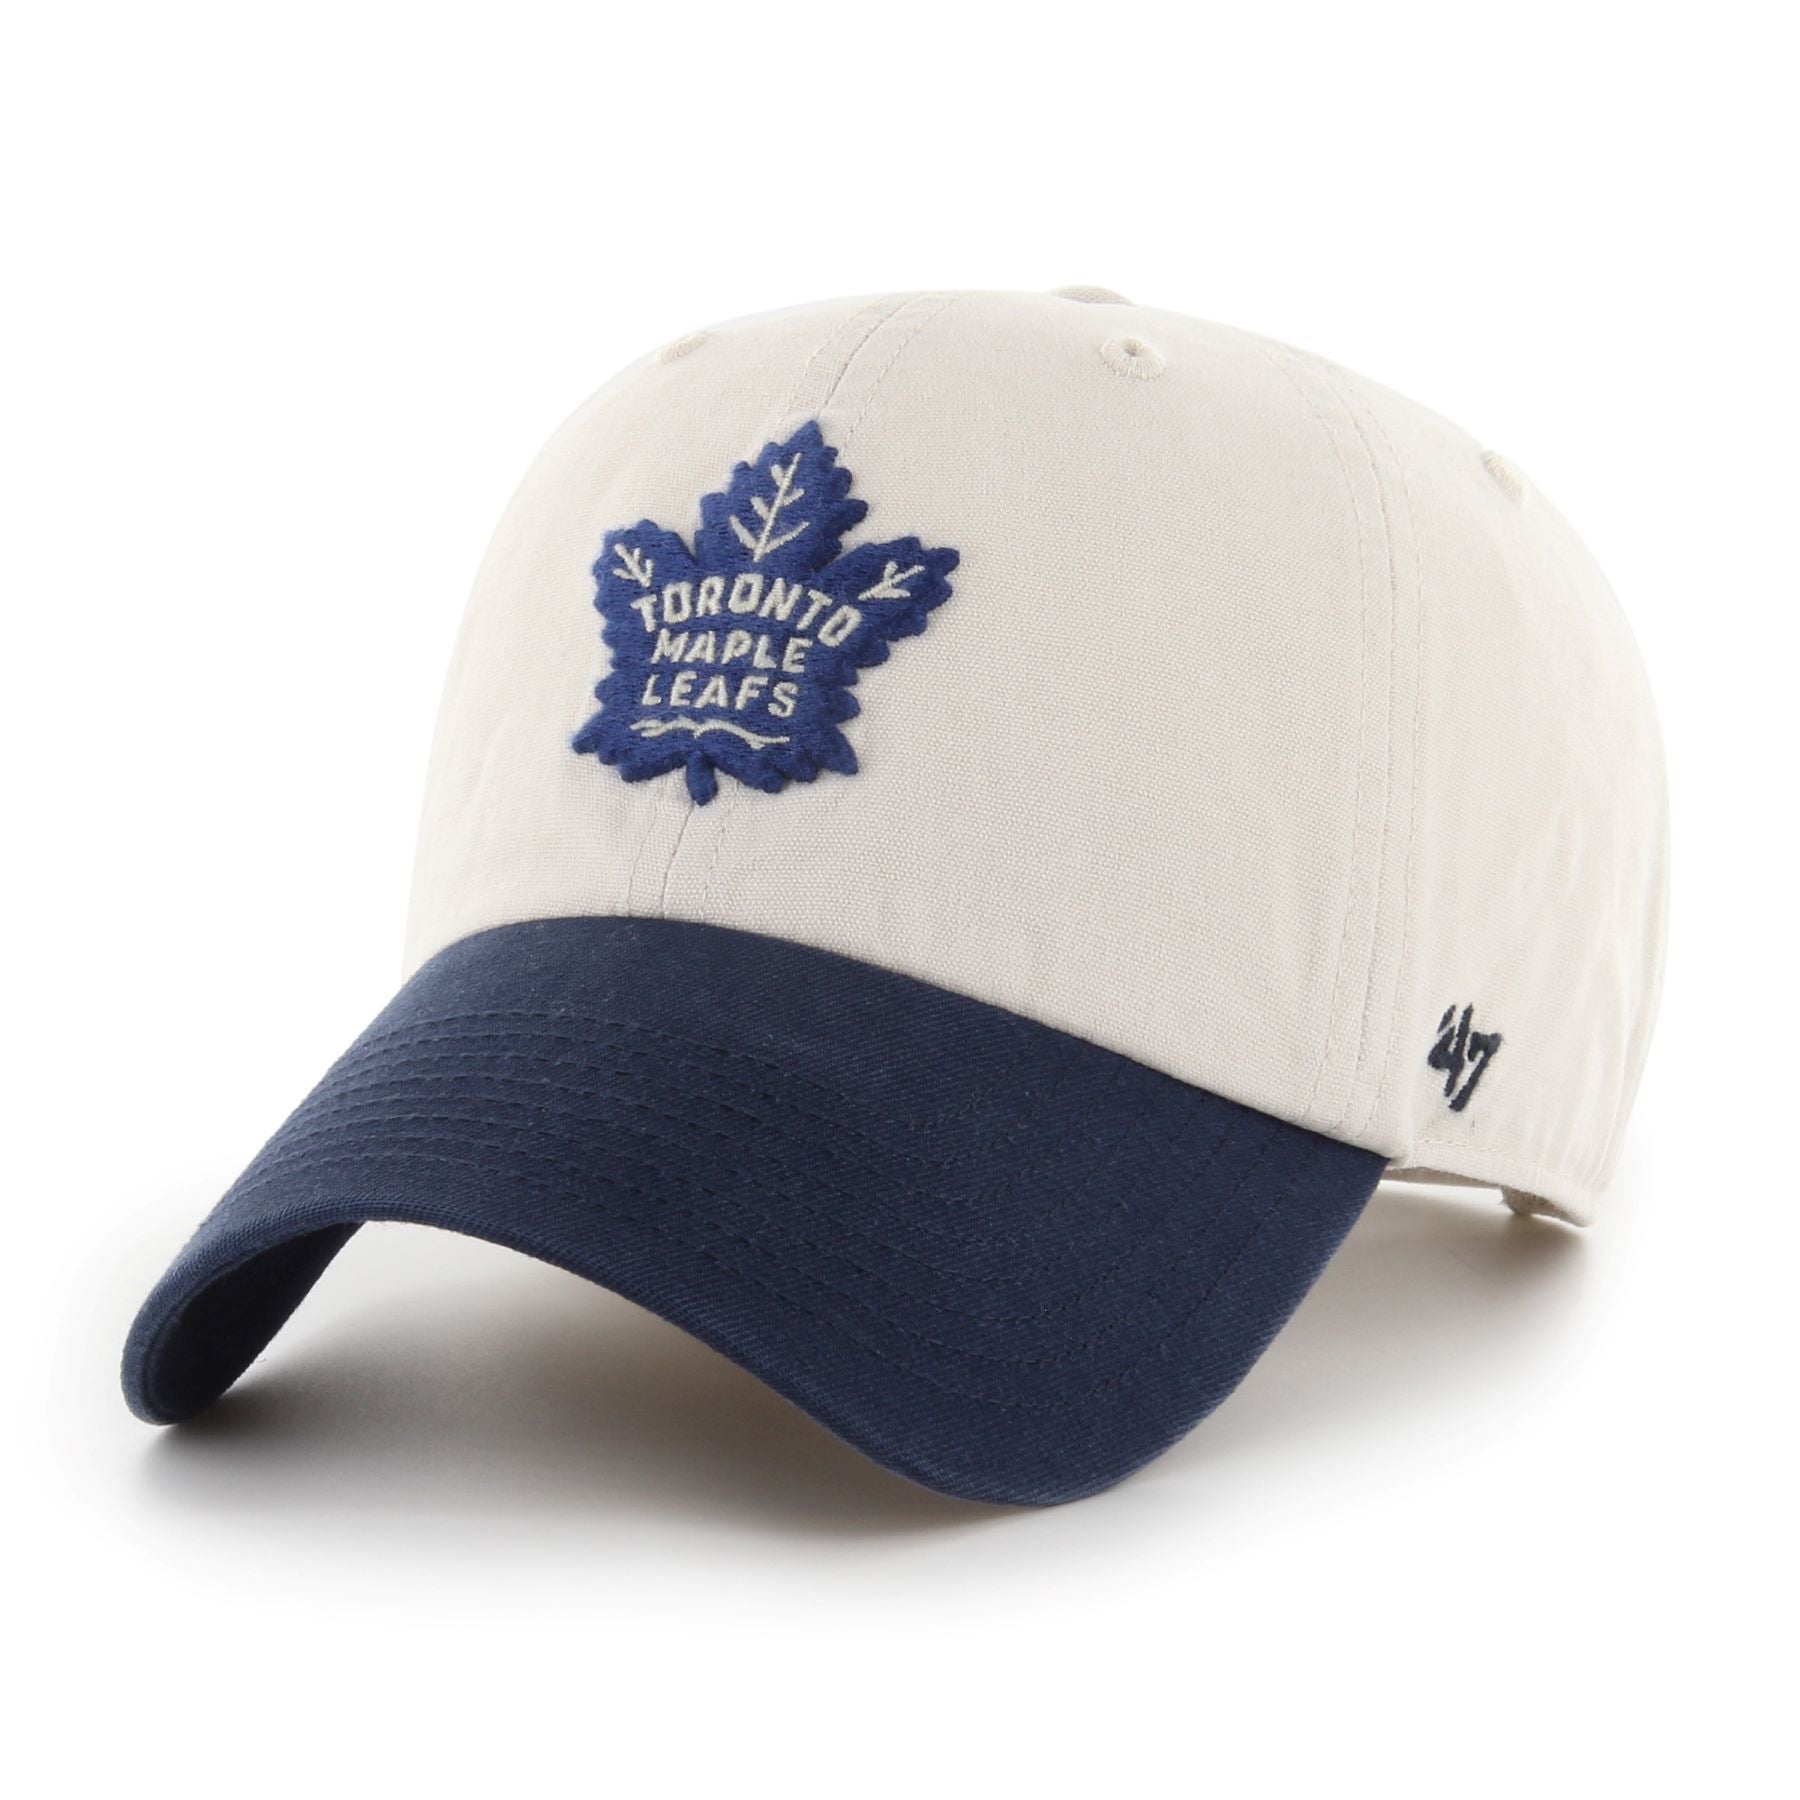 Toronto Maple Leafs '47 Clean Up Adjustable Hat - White